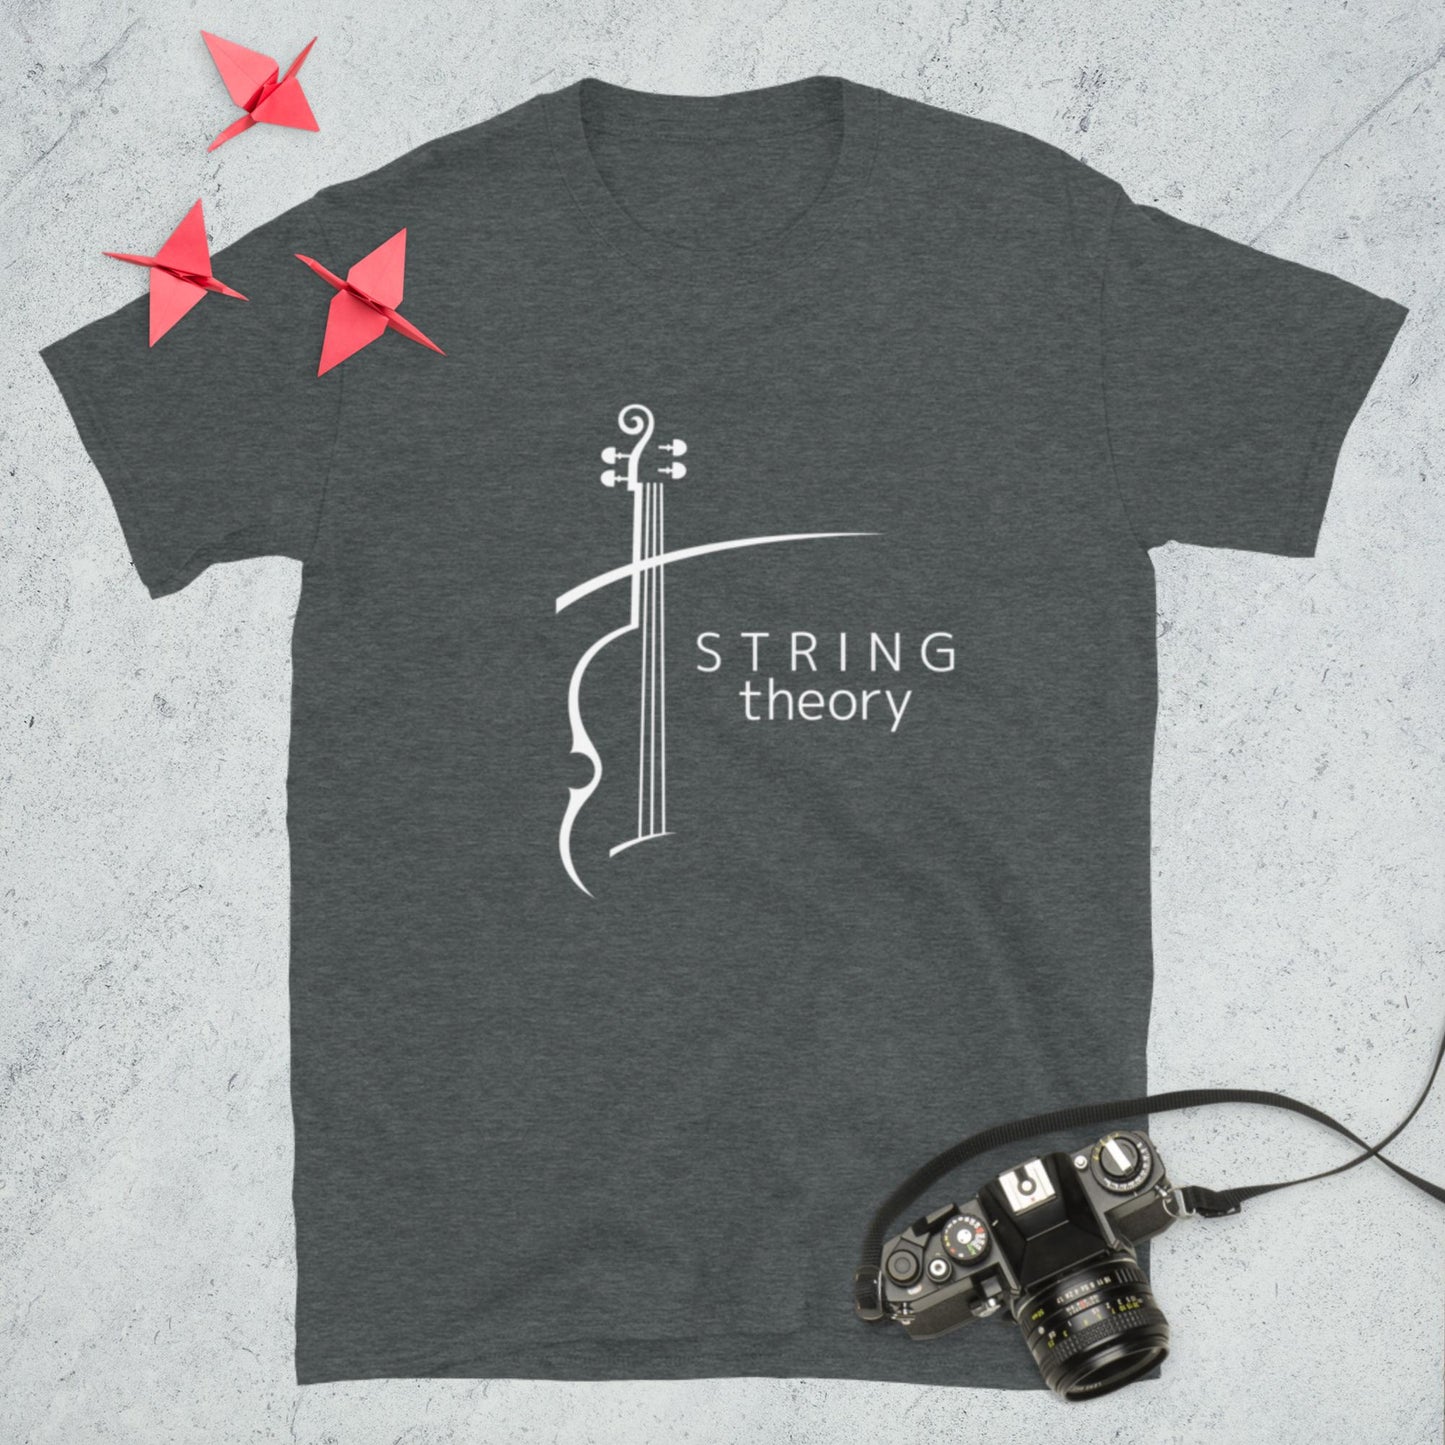 String theory. Unisex T-Shirt for the string section players